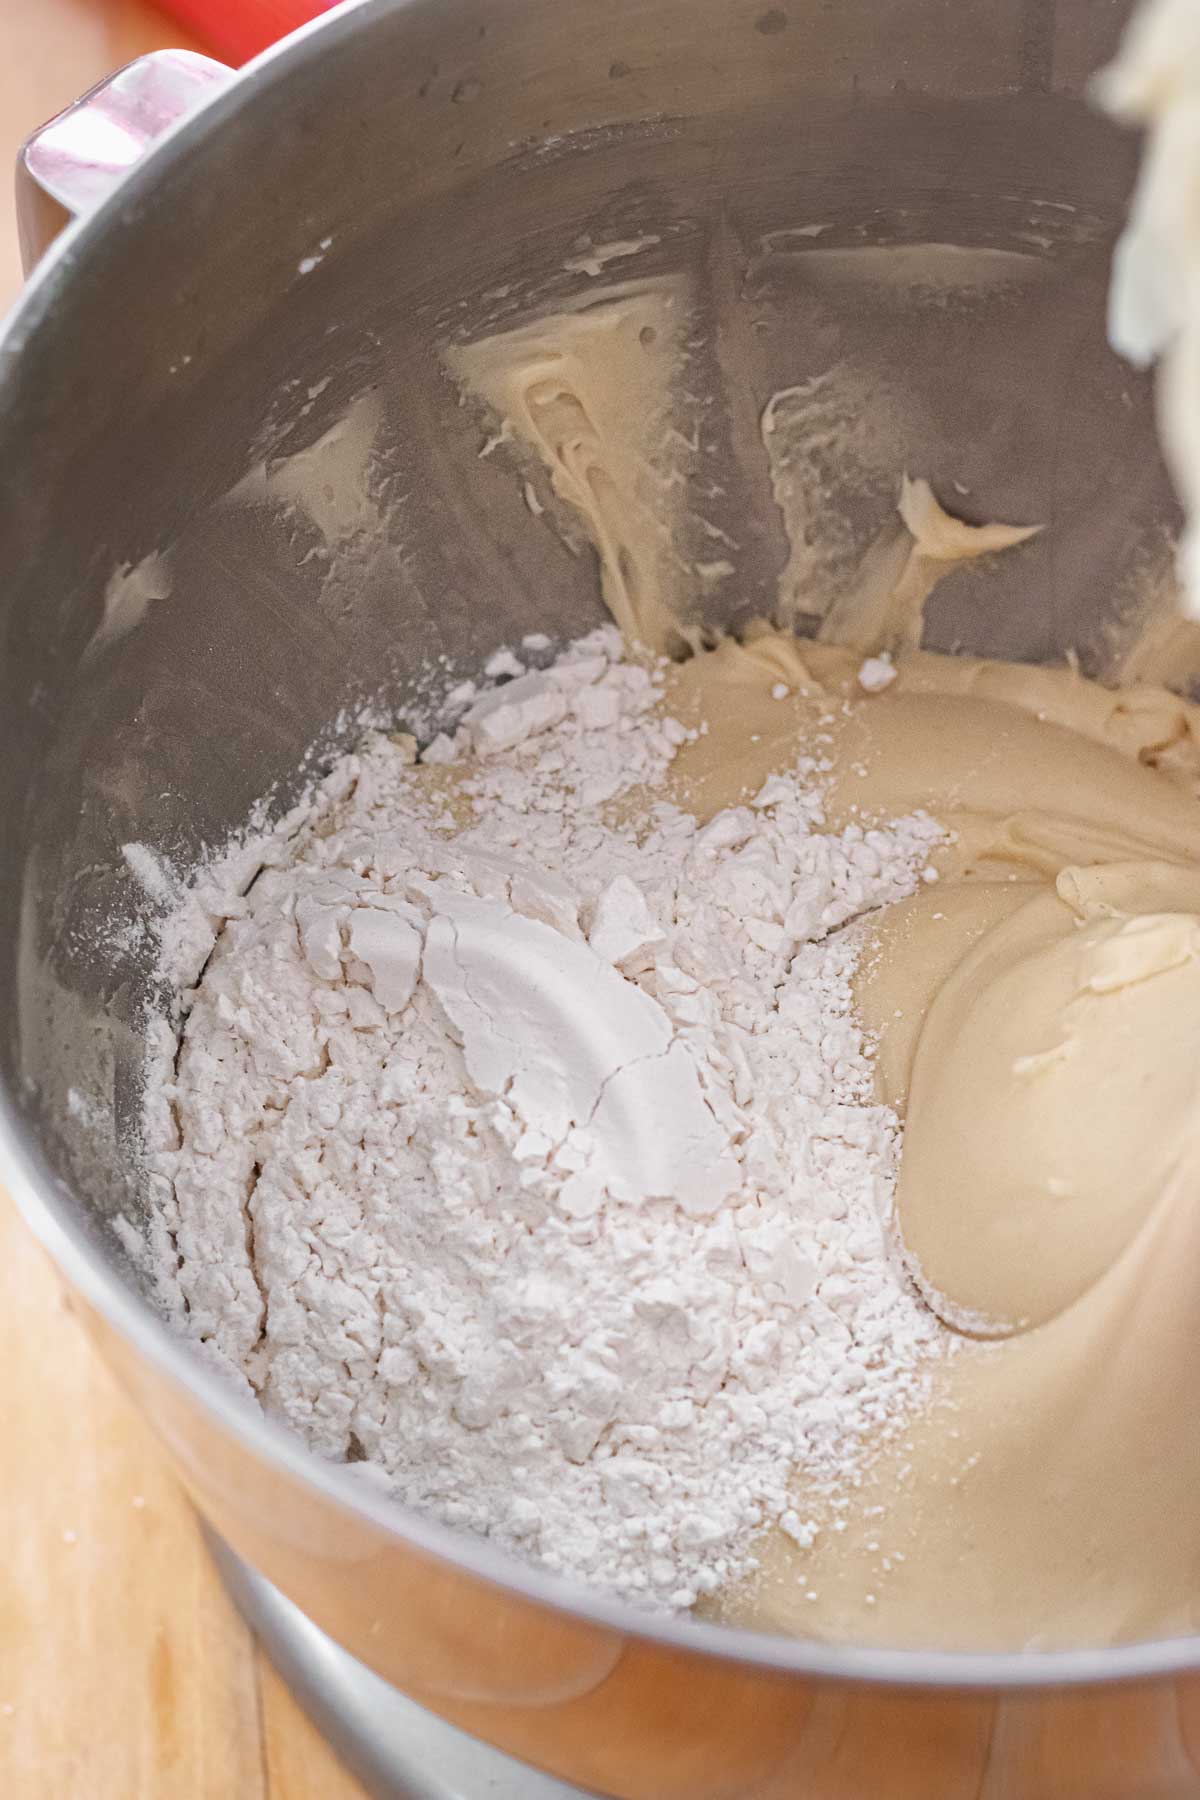 Flour in a stand mixer bowl with brioche dough.